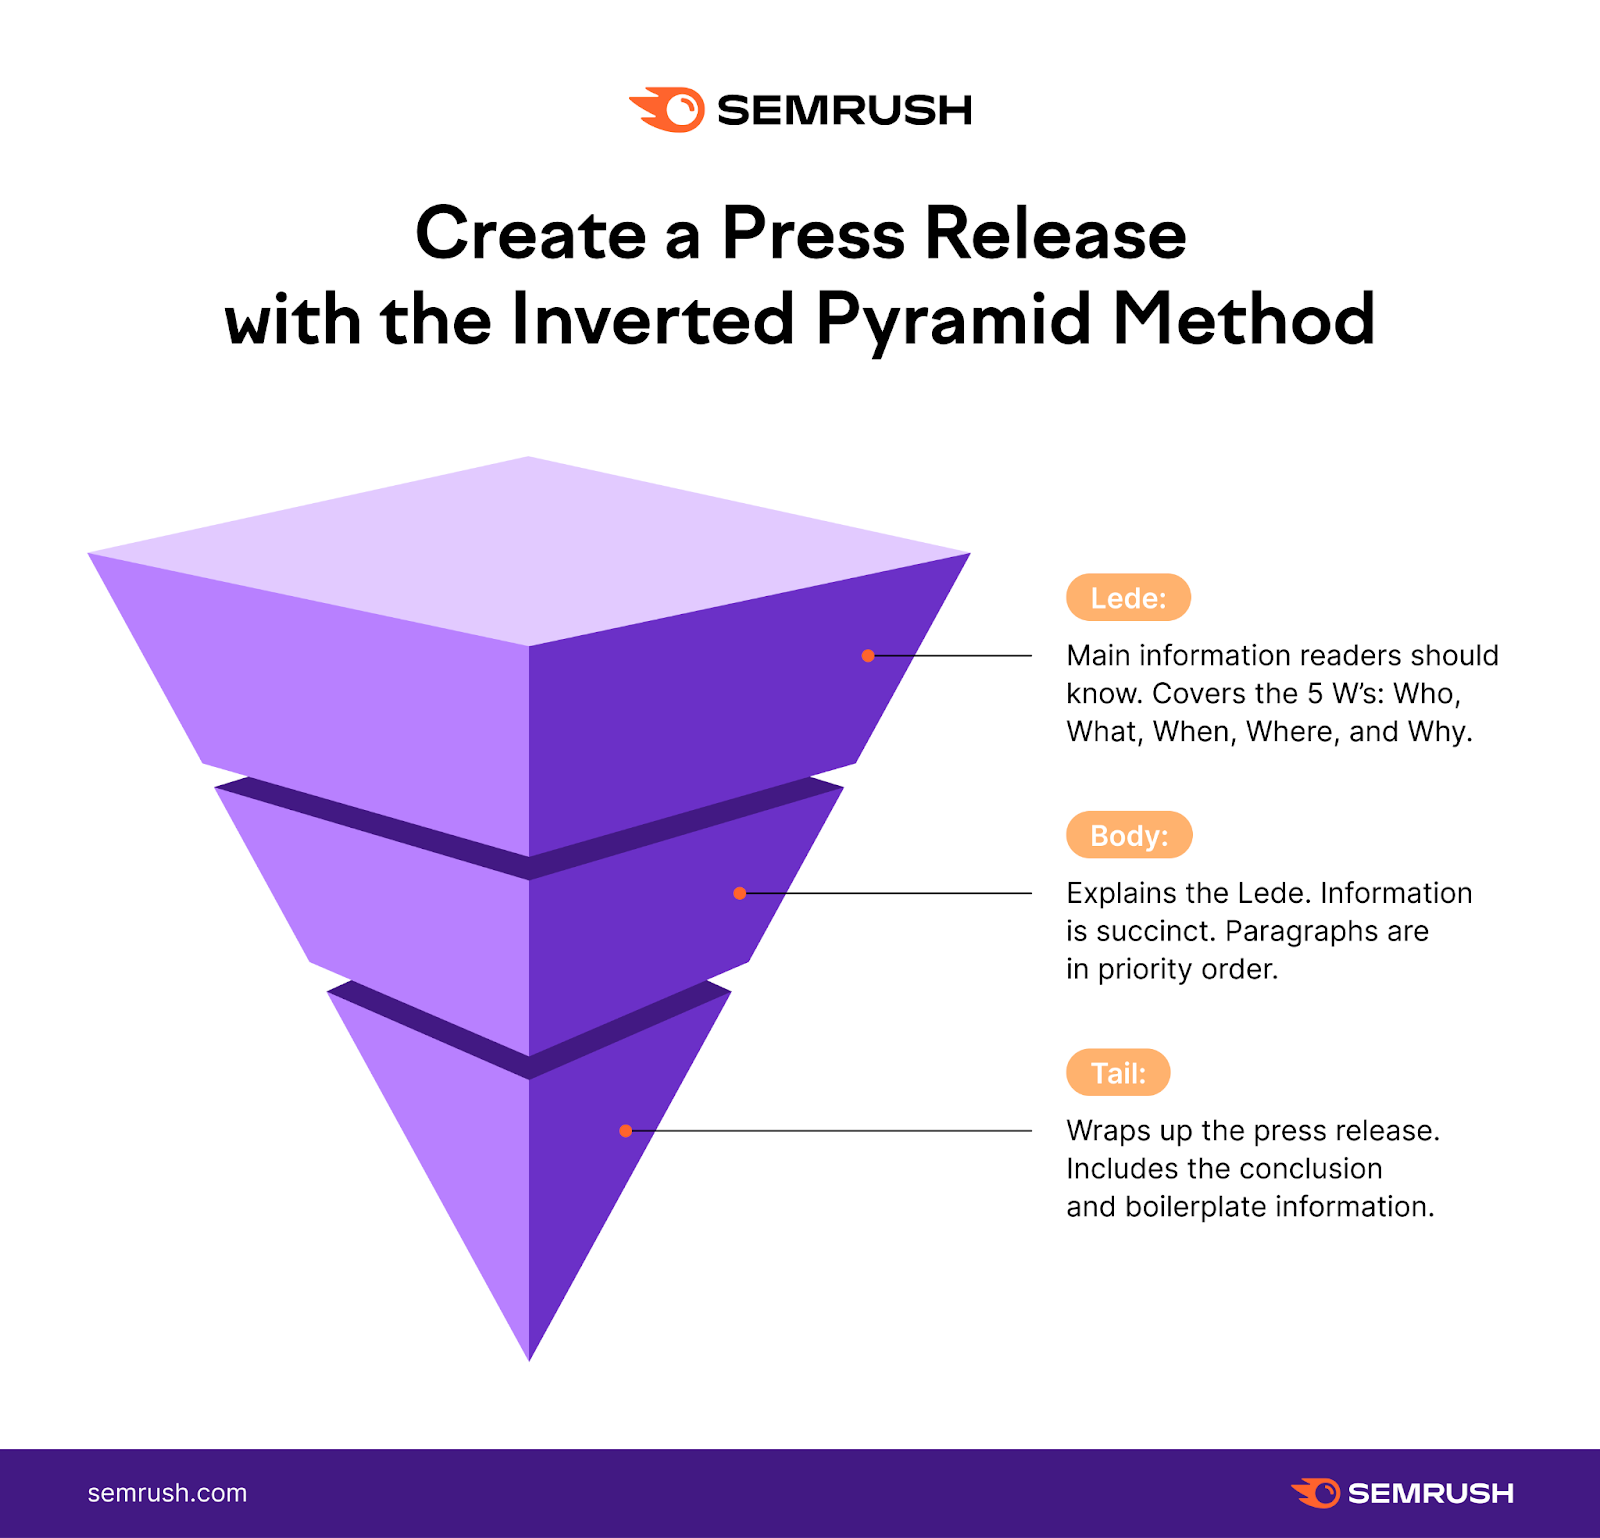 An infographic by Semrush "create a press release with the inverted pyramid method"